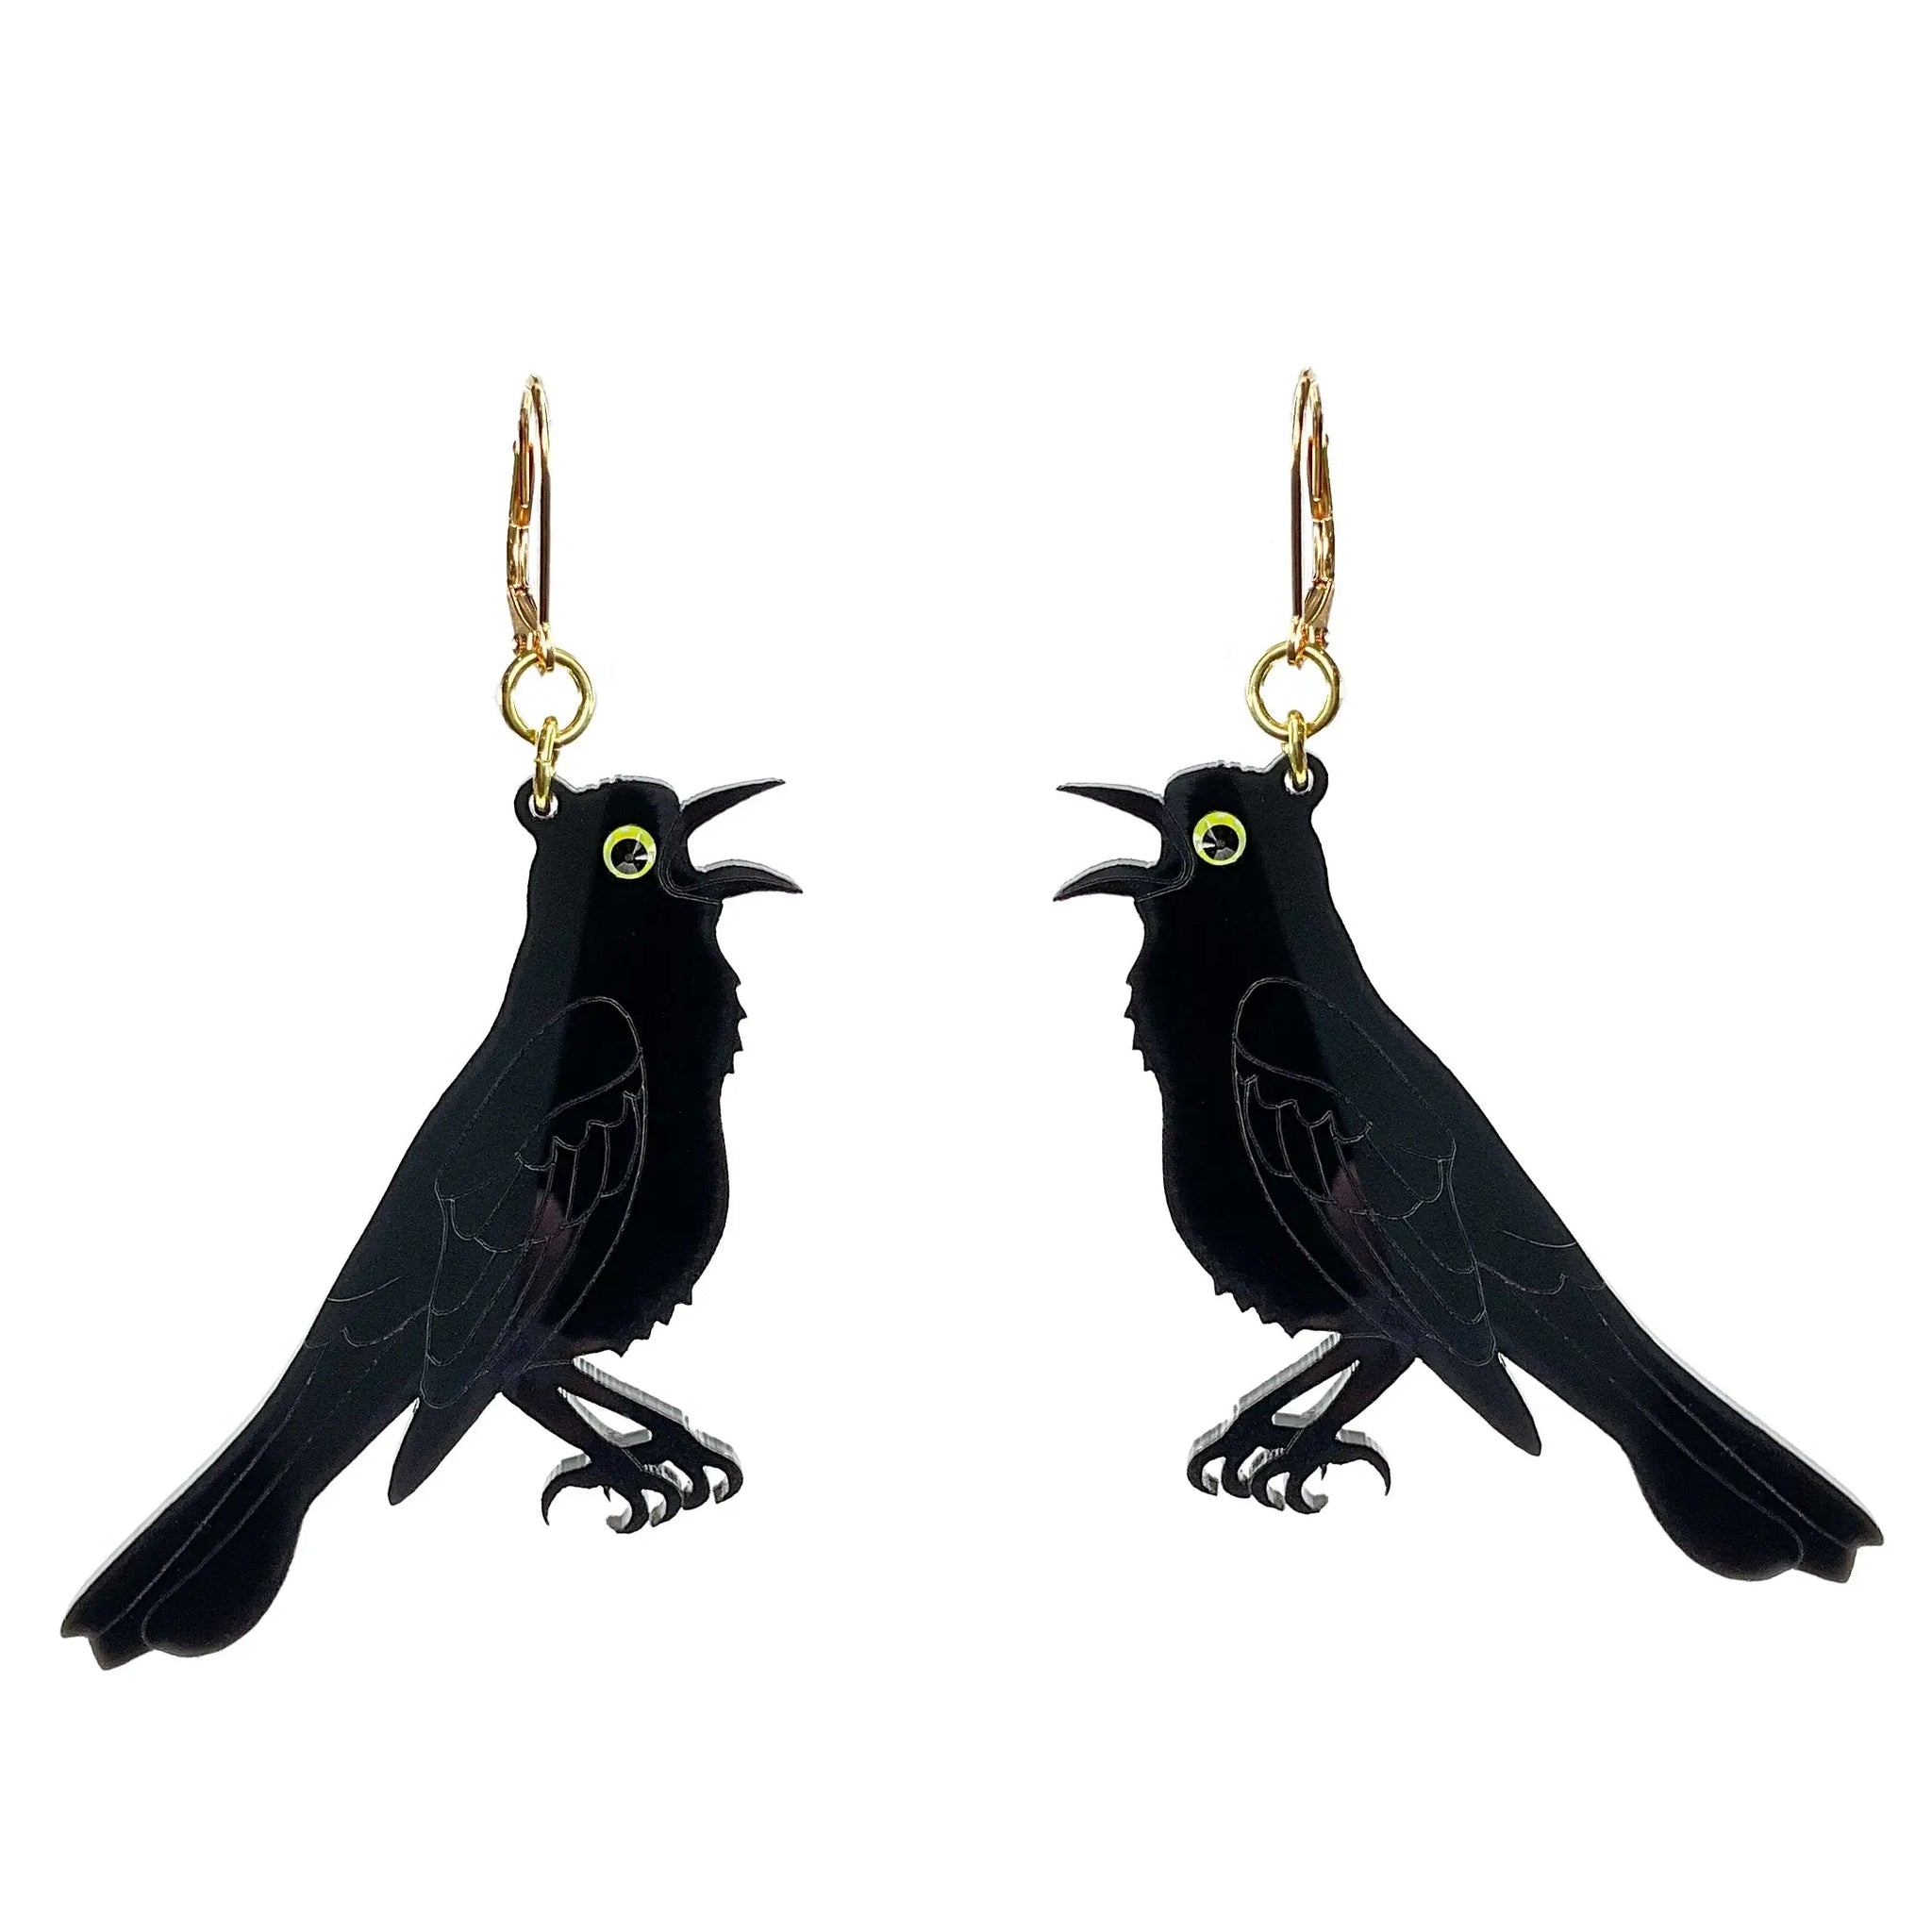 A pair of dangle earrings of two black grackle birds facing opposing sides with beady yellow eyes